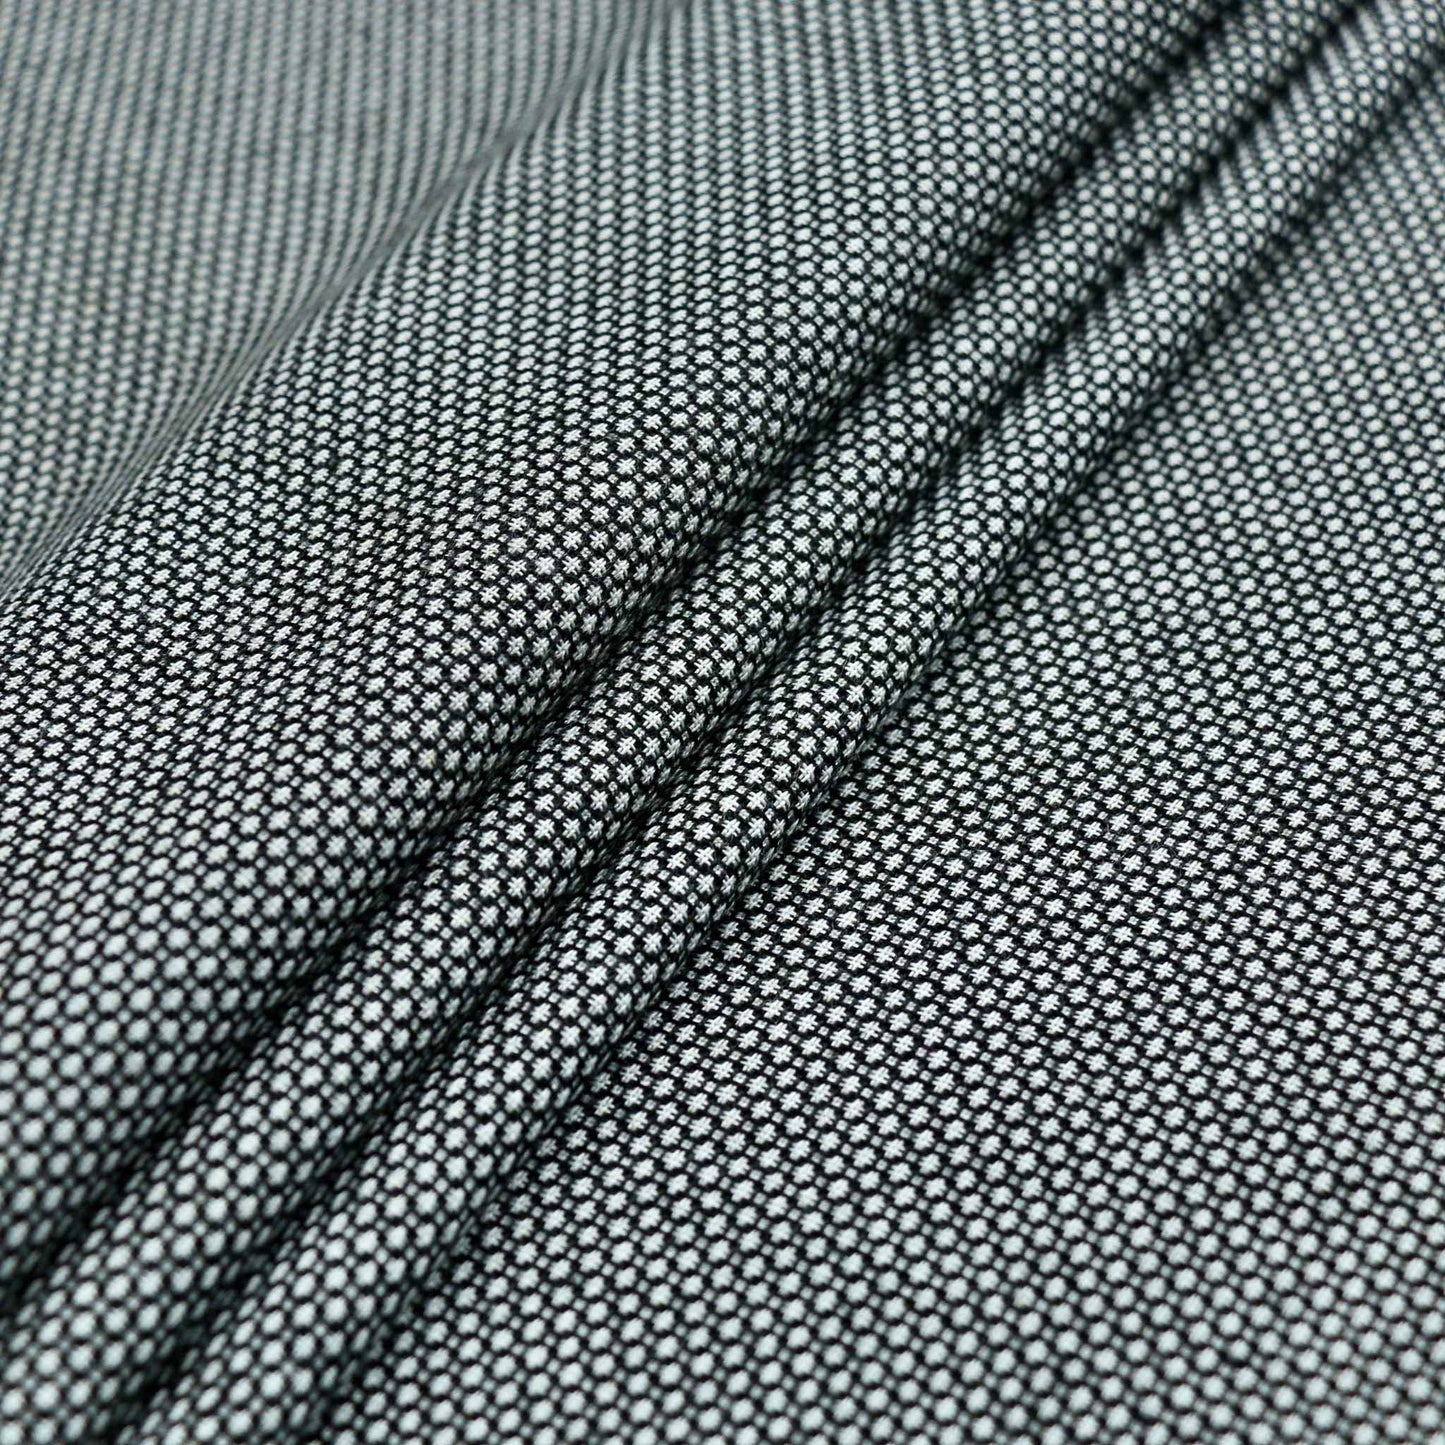 polyviscose suiting fabric with jacquard black and white dotted design